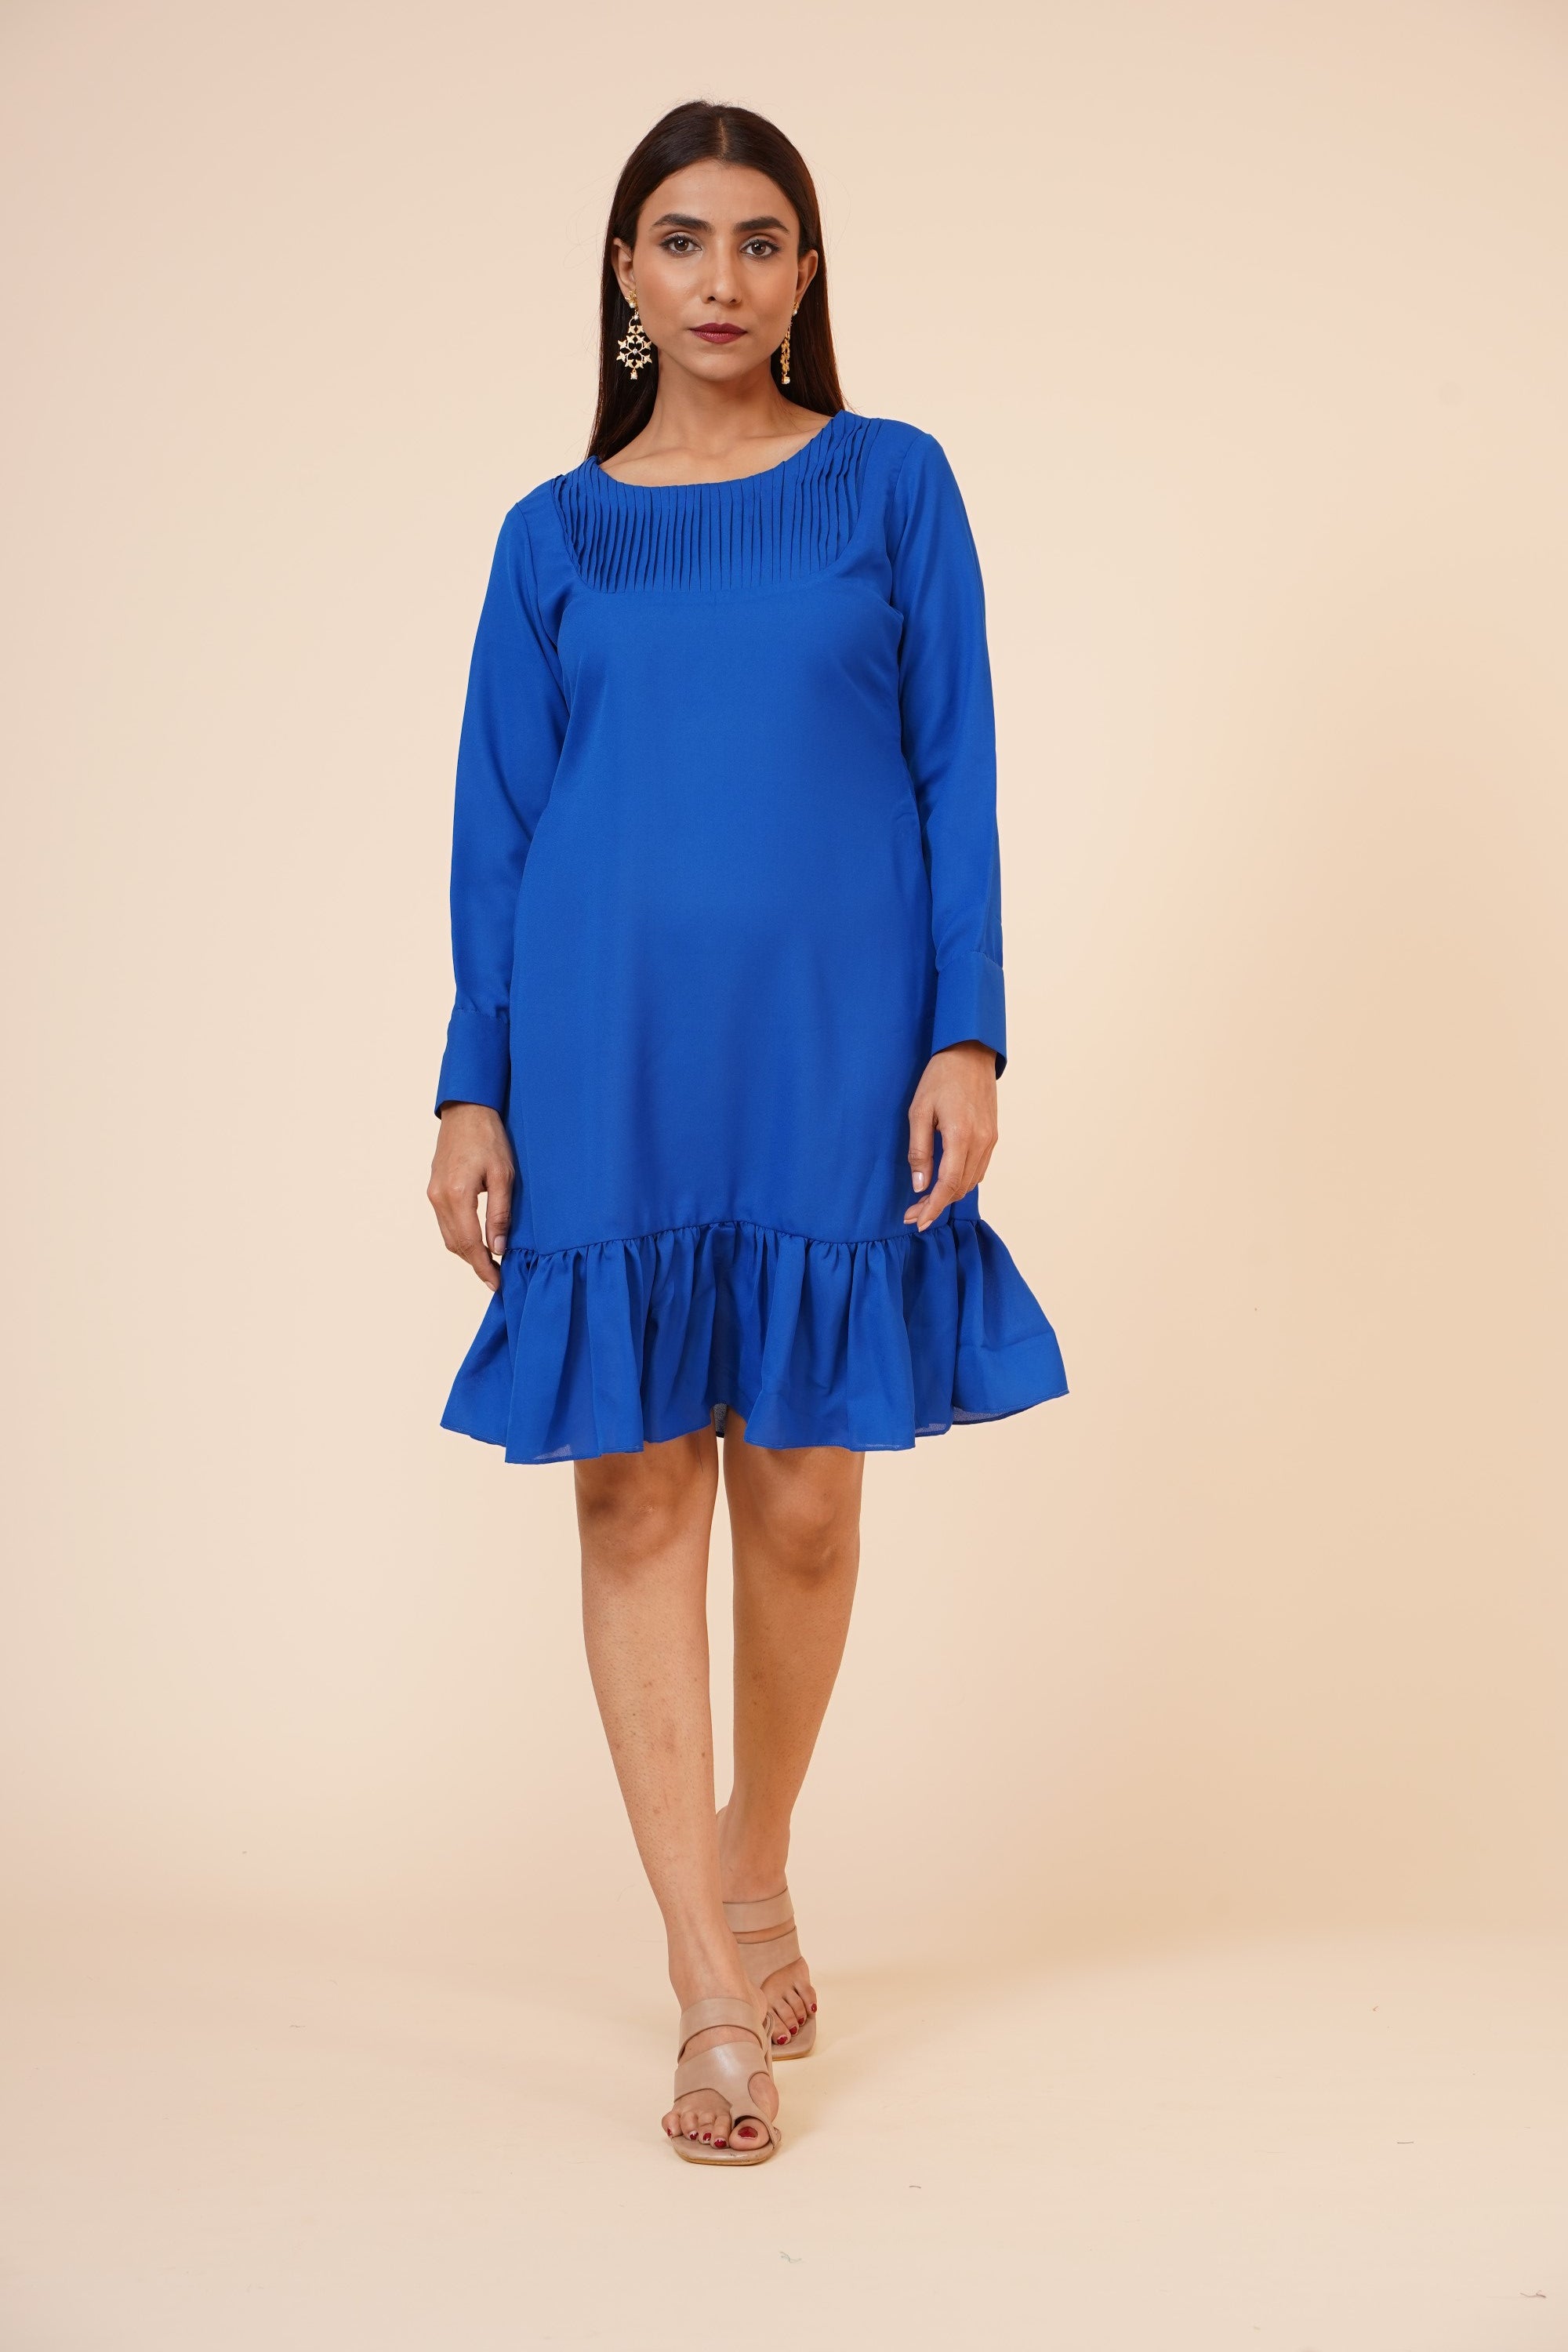 Women's Pin Tucks Georgette Midi Casual Dress Cobalt Blue - MIRACOLOS by Ruchi